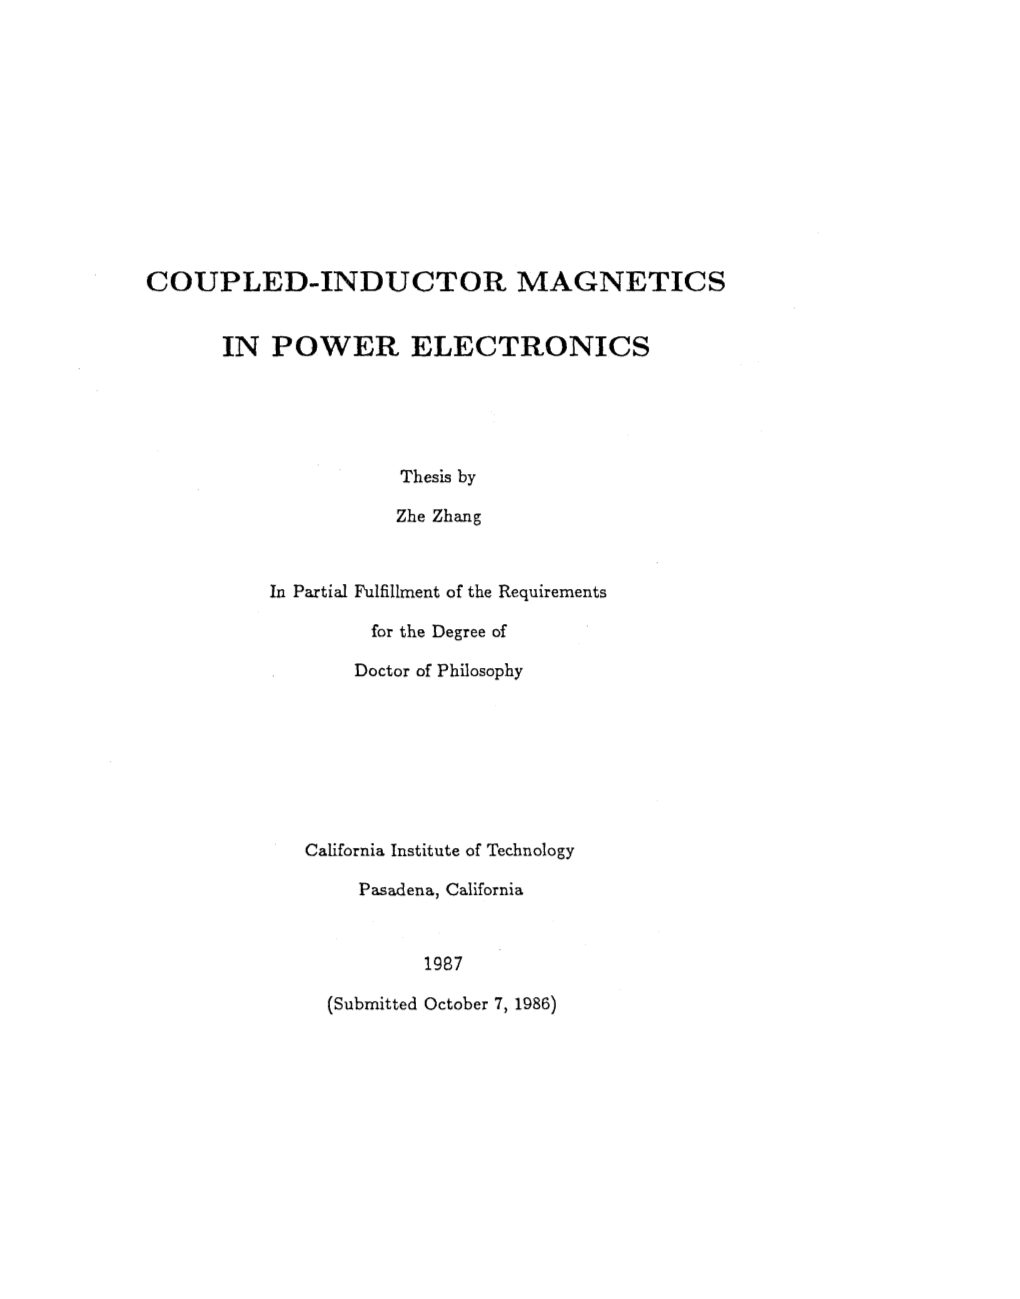 Coupled-Inductor Magnetics in Power Electronics